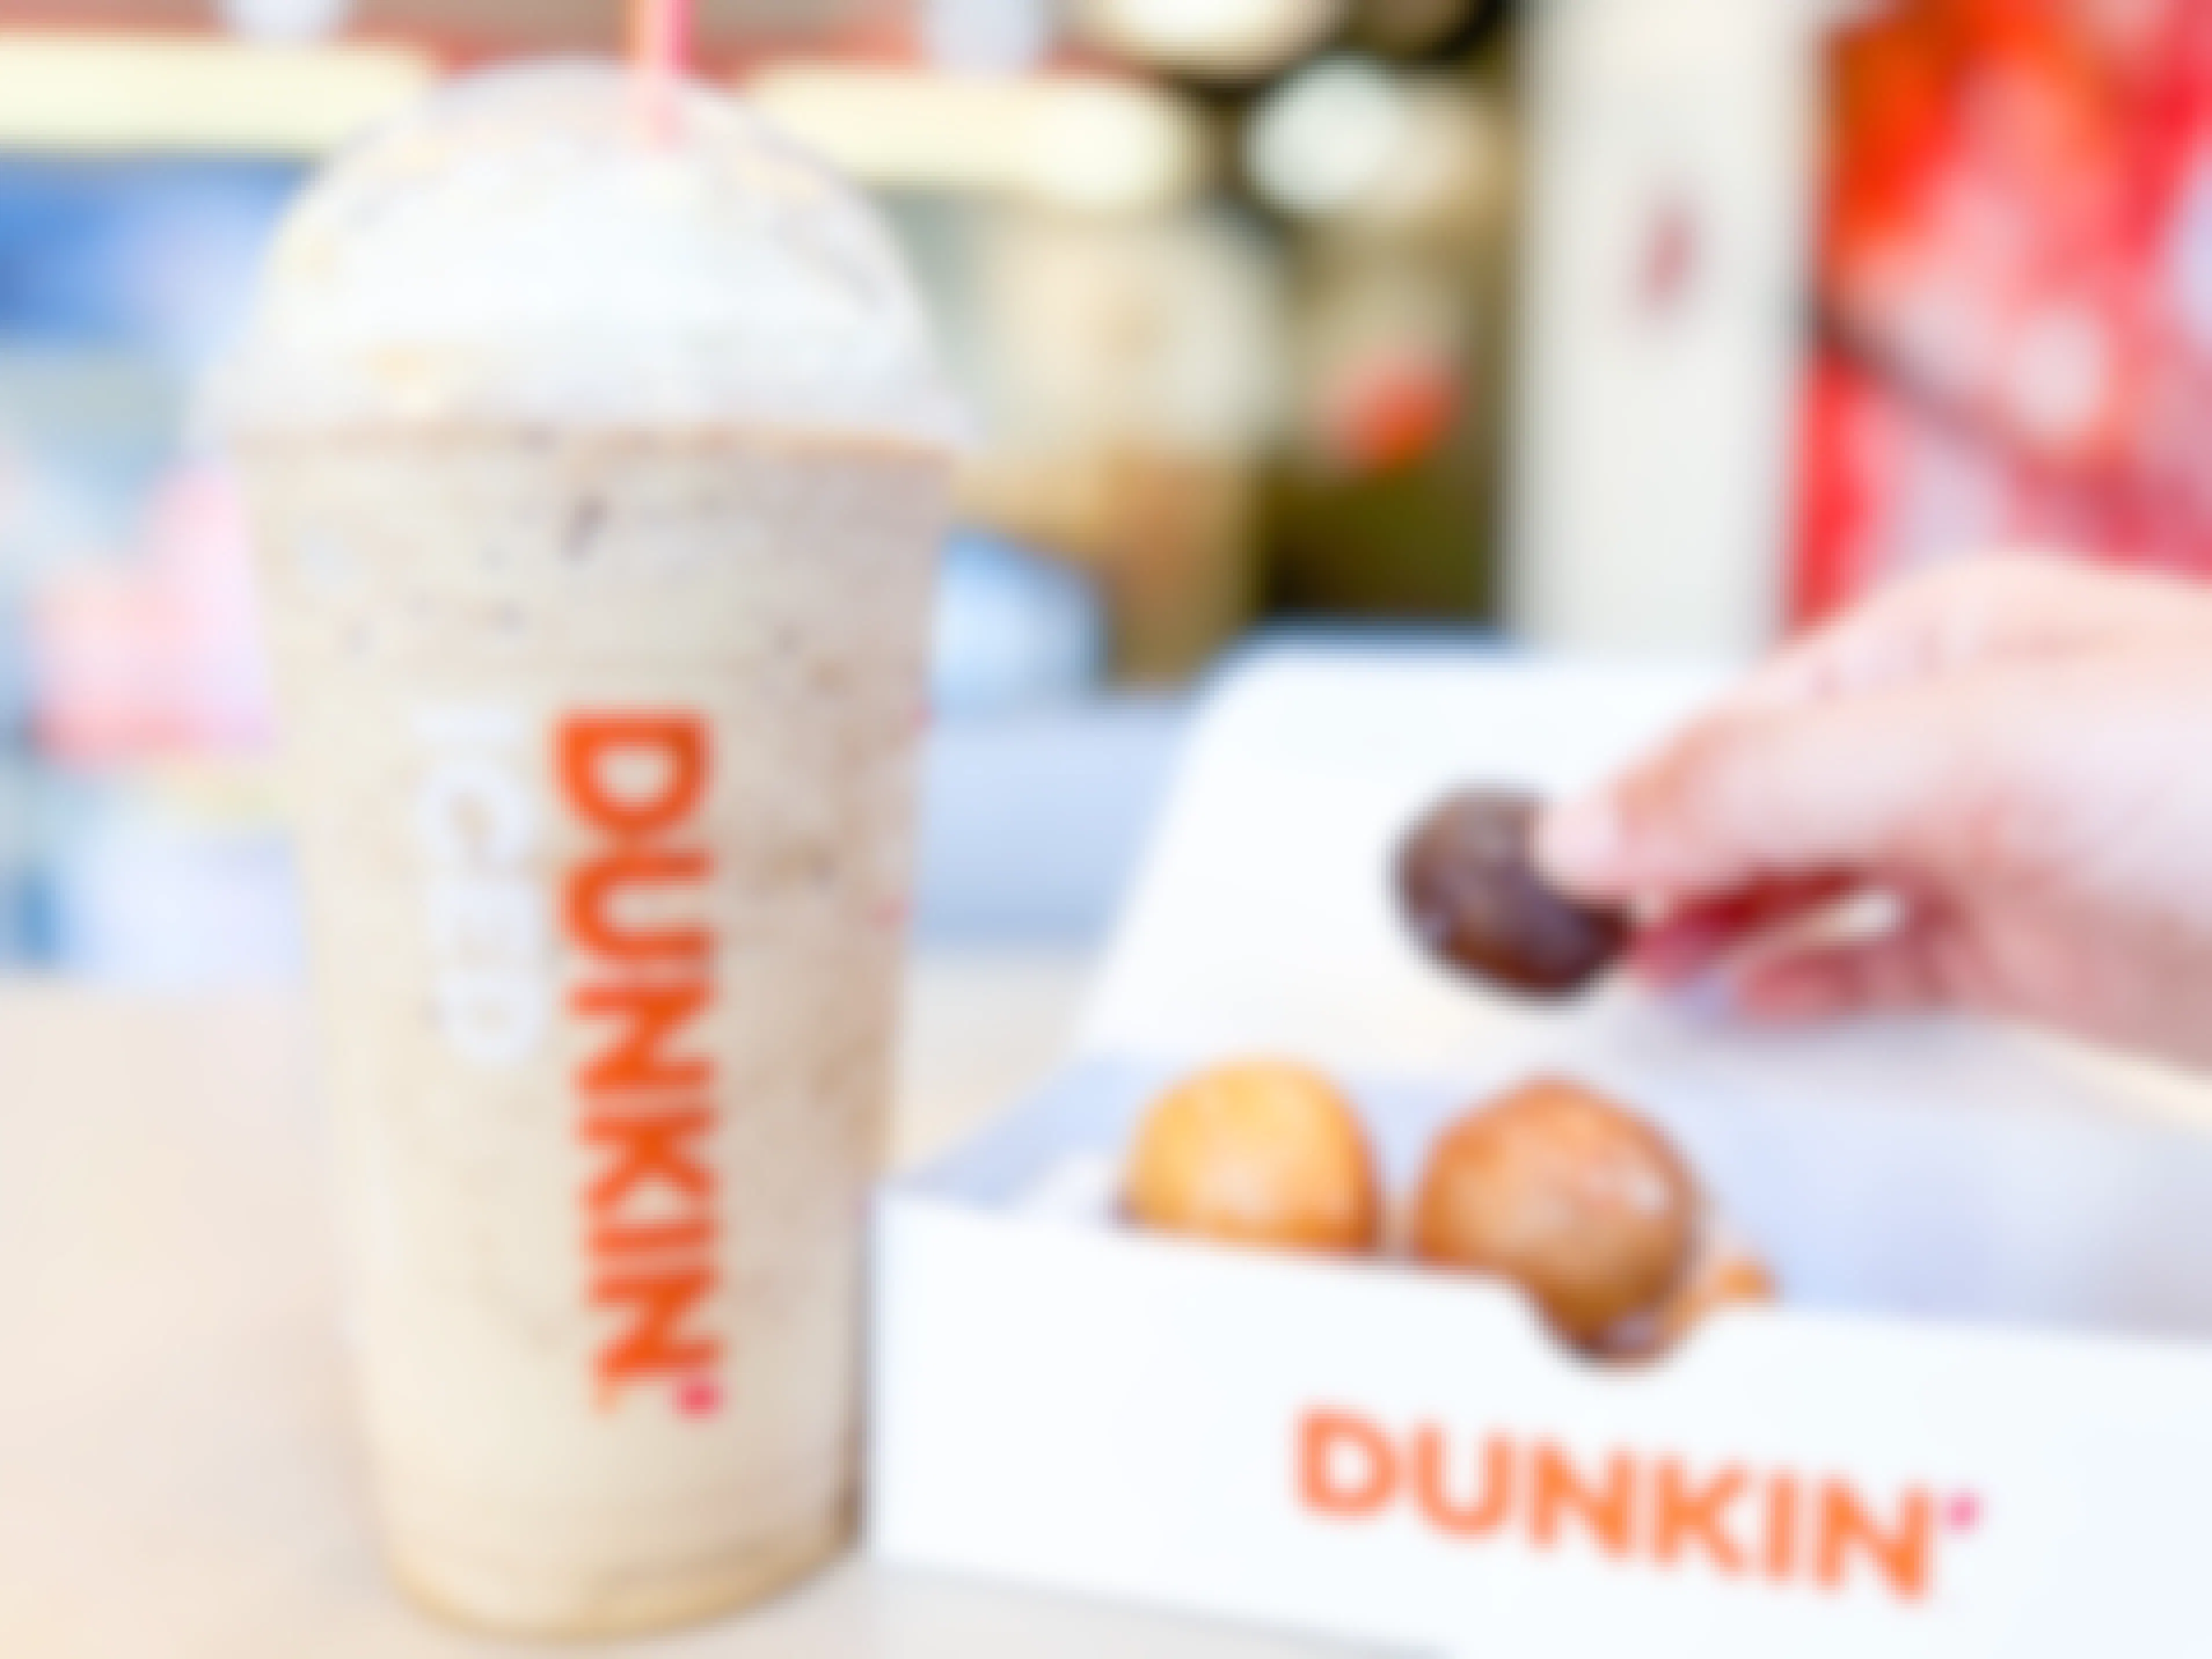 How to Save on The New Dunkin' Ice Spice Drink